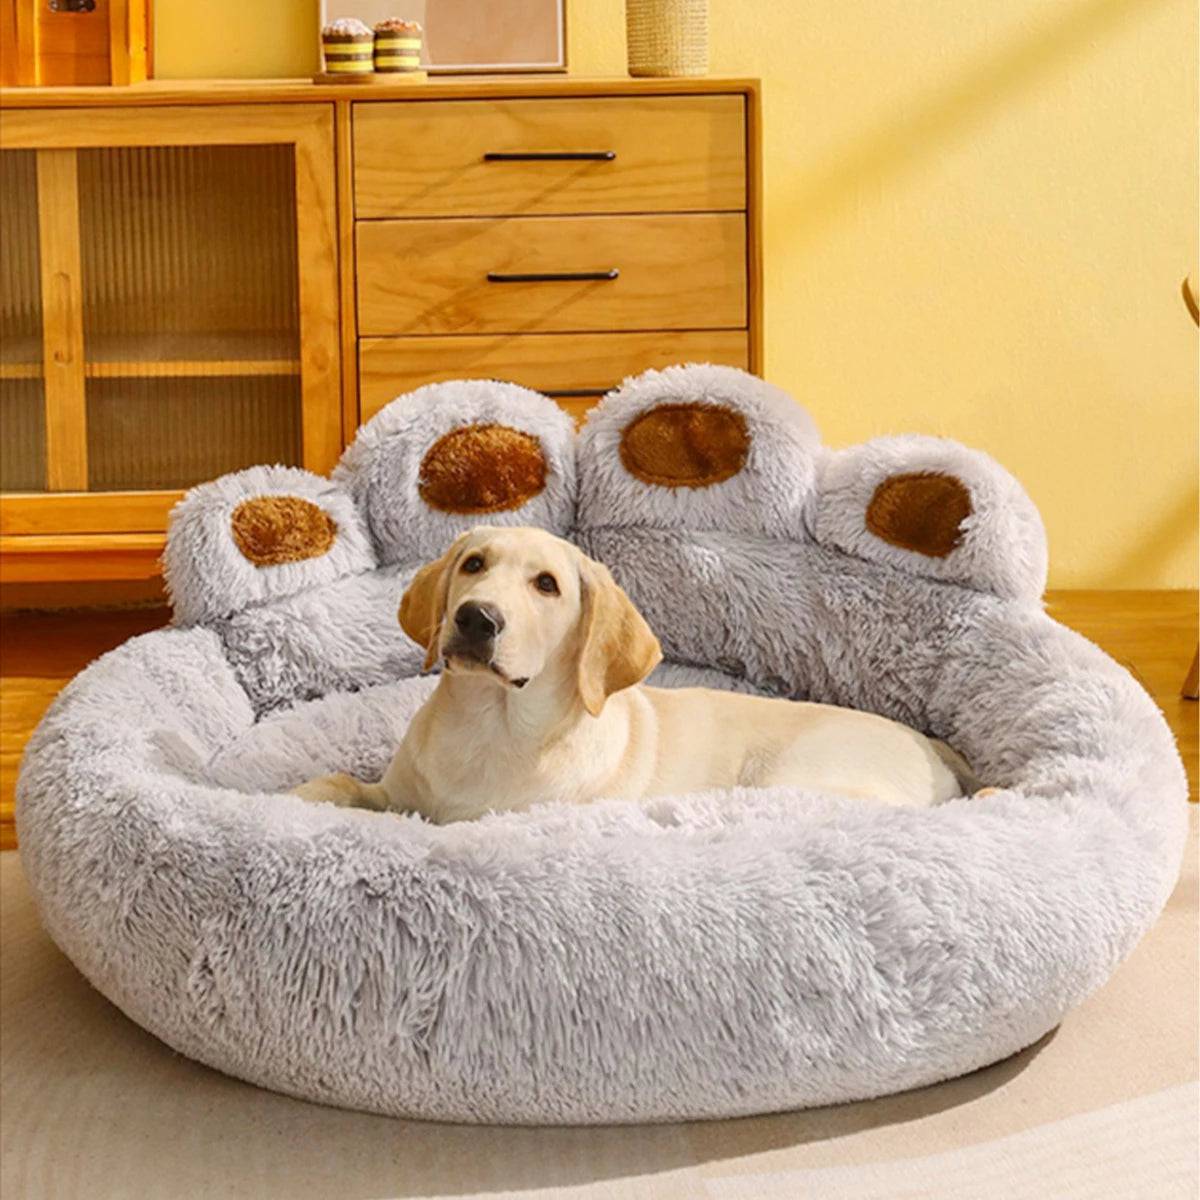 Fluffy Dog Bed: The Perfect Place for Your Furry Friend to Relax Light Gery / 50cm - IHavePaws